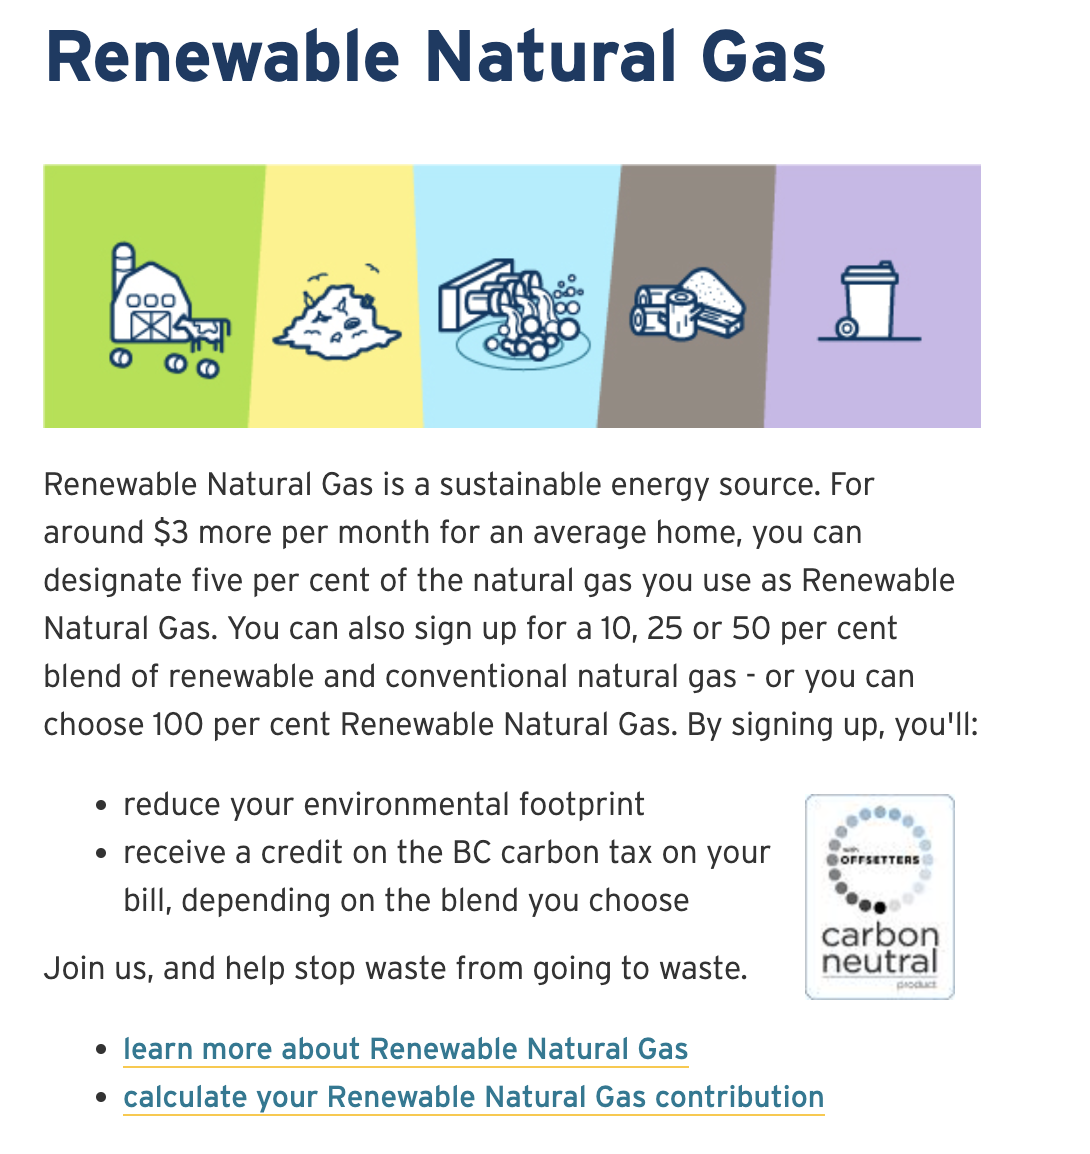 A screen grab shows what FortisBC customers can see through their online customer portals. A strip of cartoon biomethane sources sits above a paragraph that explains how customers can buy up to 100 per cent “renewable natural gas.” The paragraph does not explain if the “renewable natural gas” will be captured biomethane or renewable gas like hydrogen.